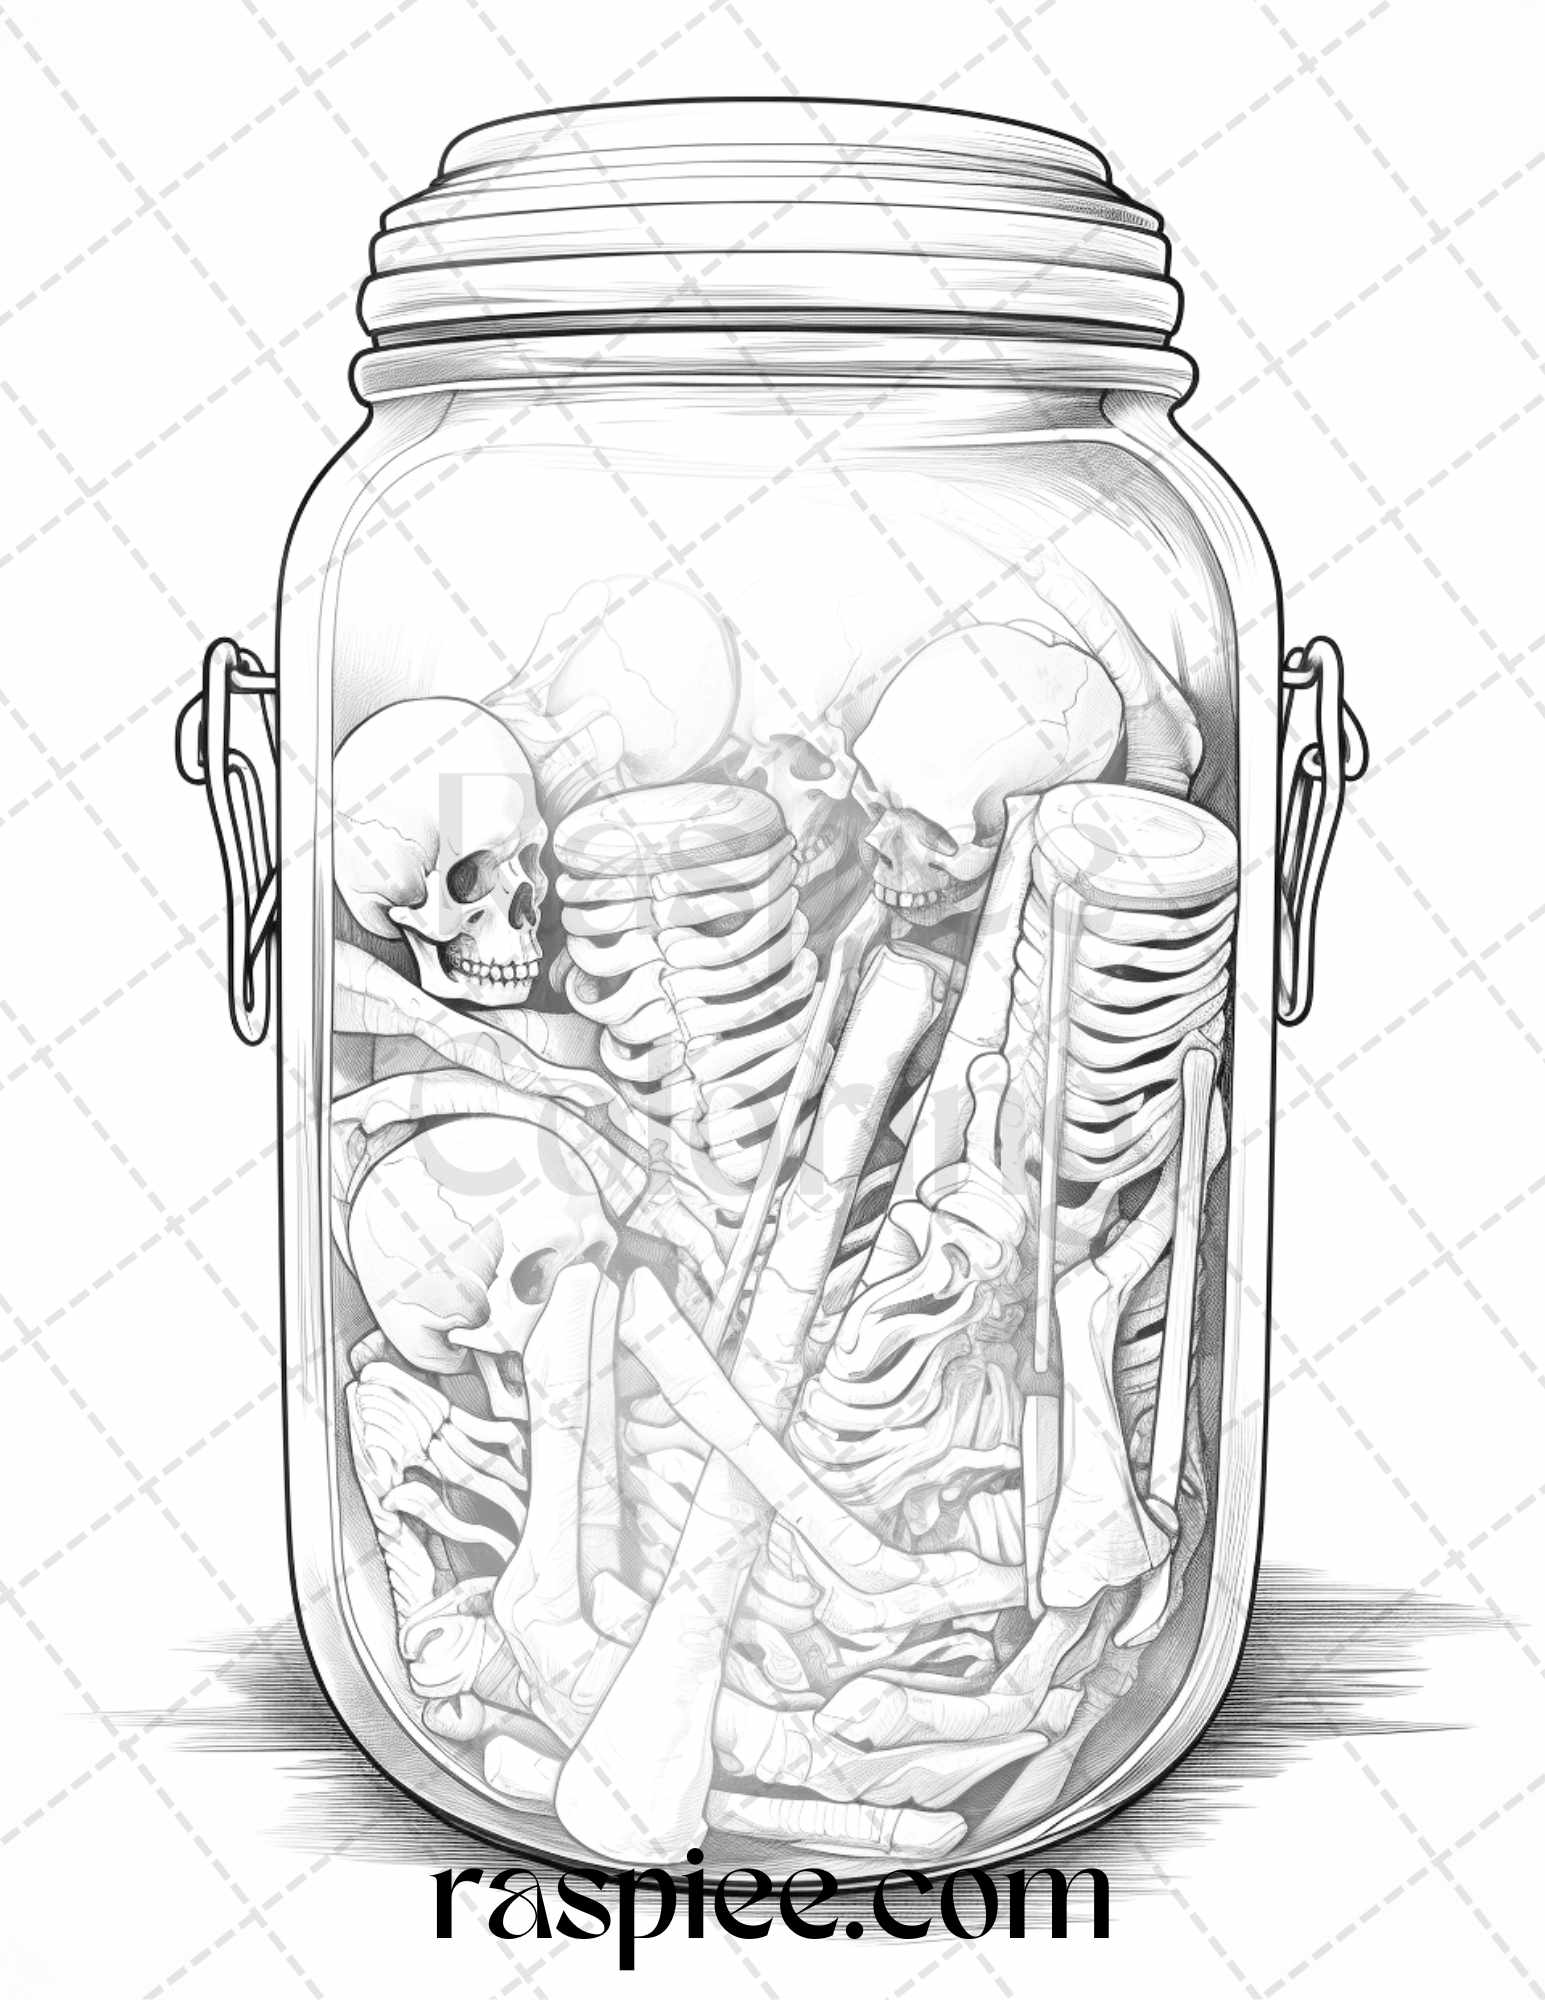 Halloween in Jar Grayscale Printable Coloring Pages, Halloween Jar Illustrations for Adults, Spooky Grayscale Coloring Sheets, Printable Halloween Coloring Fun, Adult Grayscale Coloring Designs, Halloween Printable Decorations, Relaxing Halloween Coloring Pages